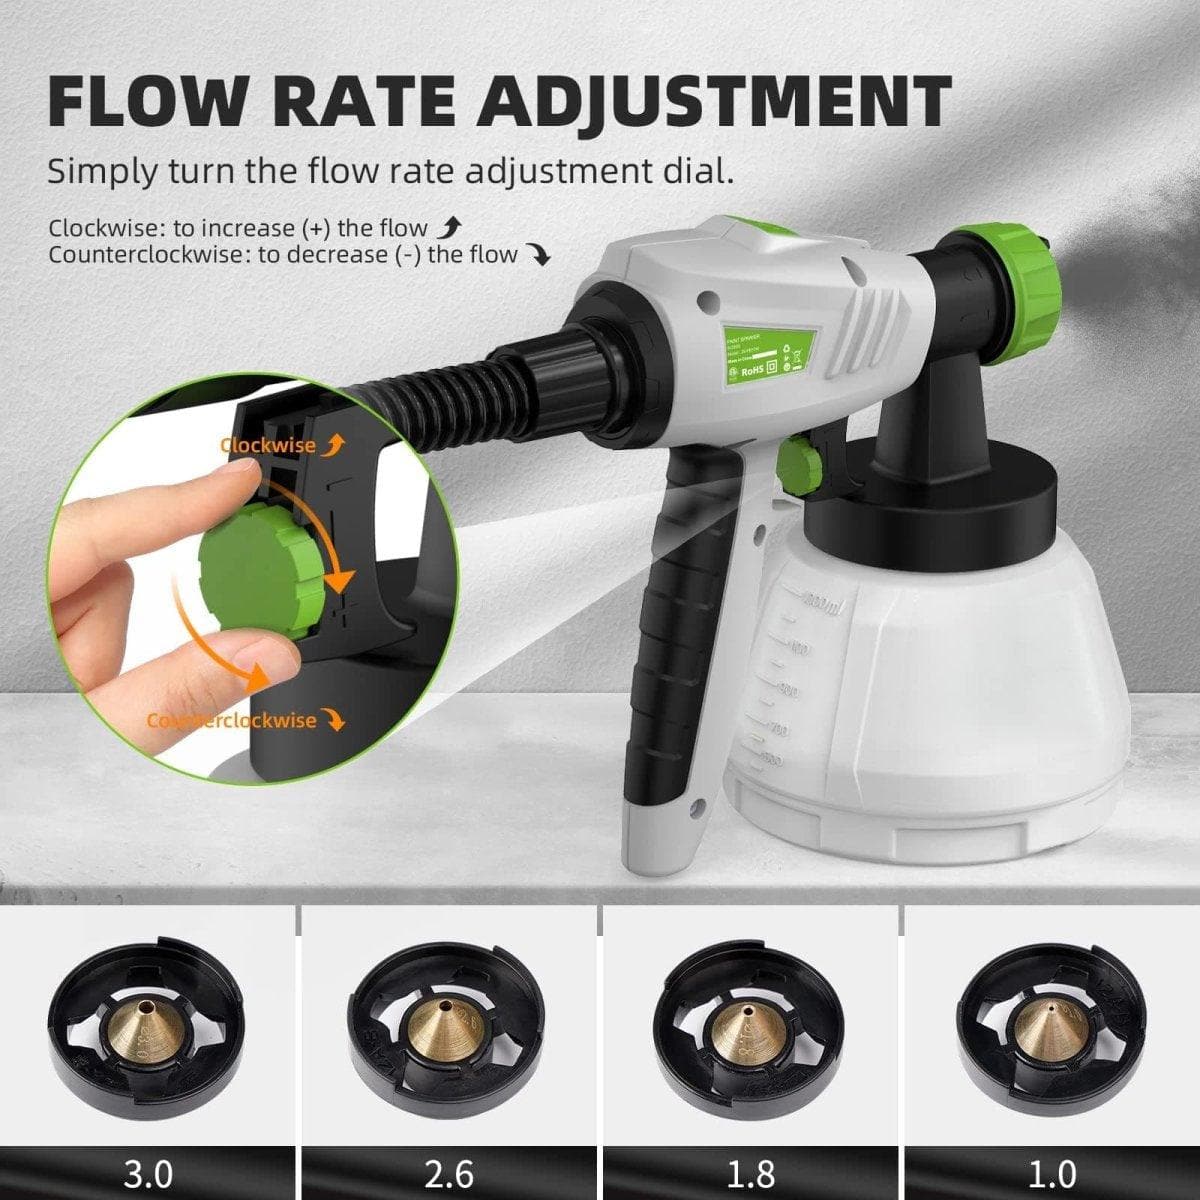 Huepar Tools SG800 HVLP electric paint sprayer with 4 metal nozzles and 3 patterns, ideal for home interior and exterior walls, house painting, ceiling, fence, cabinet, chair3